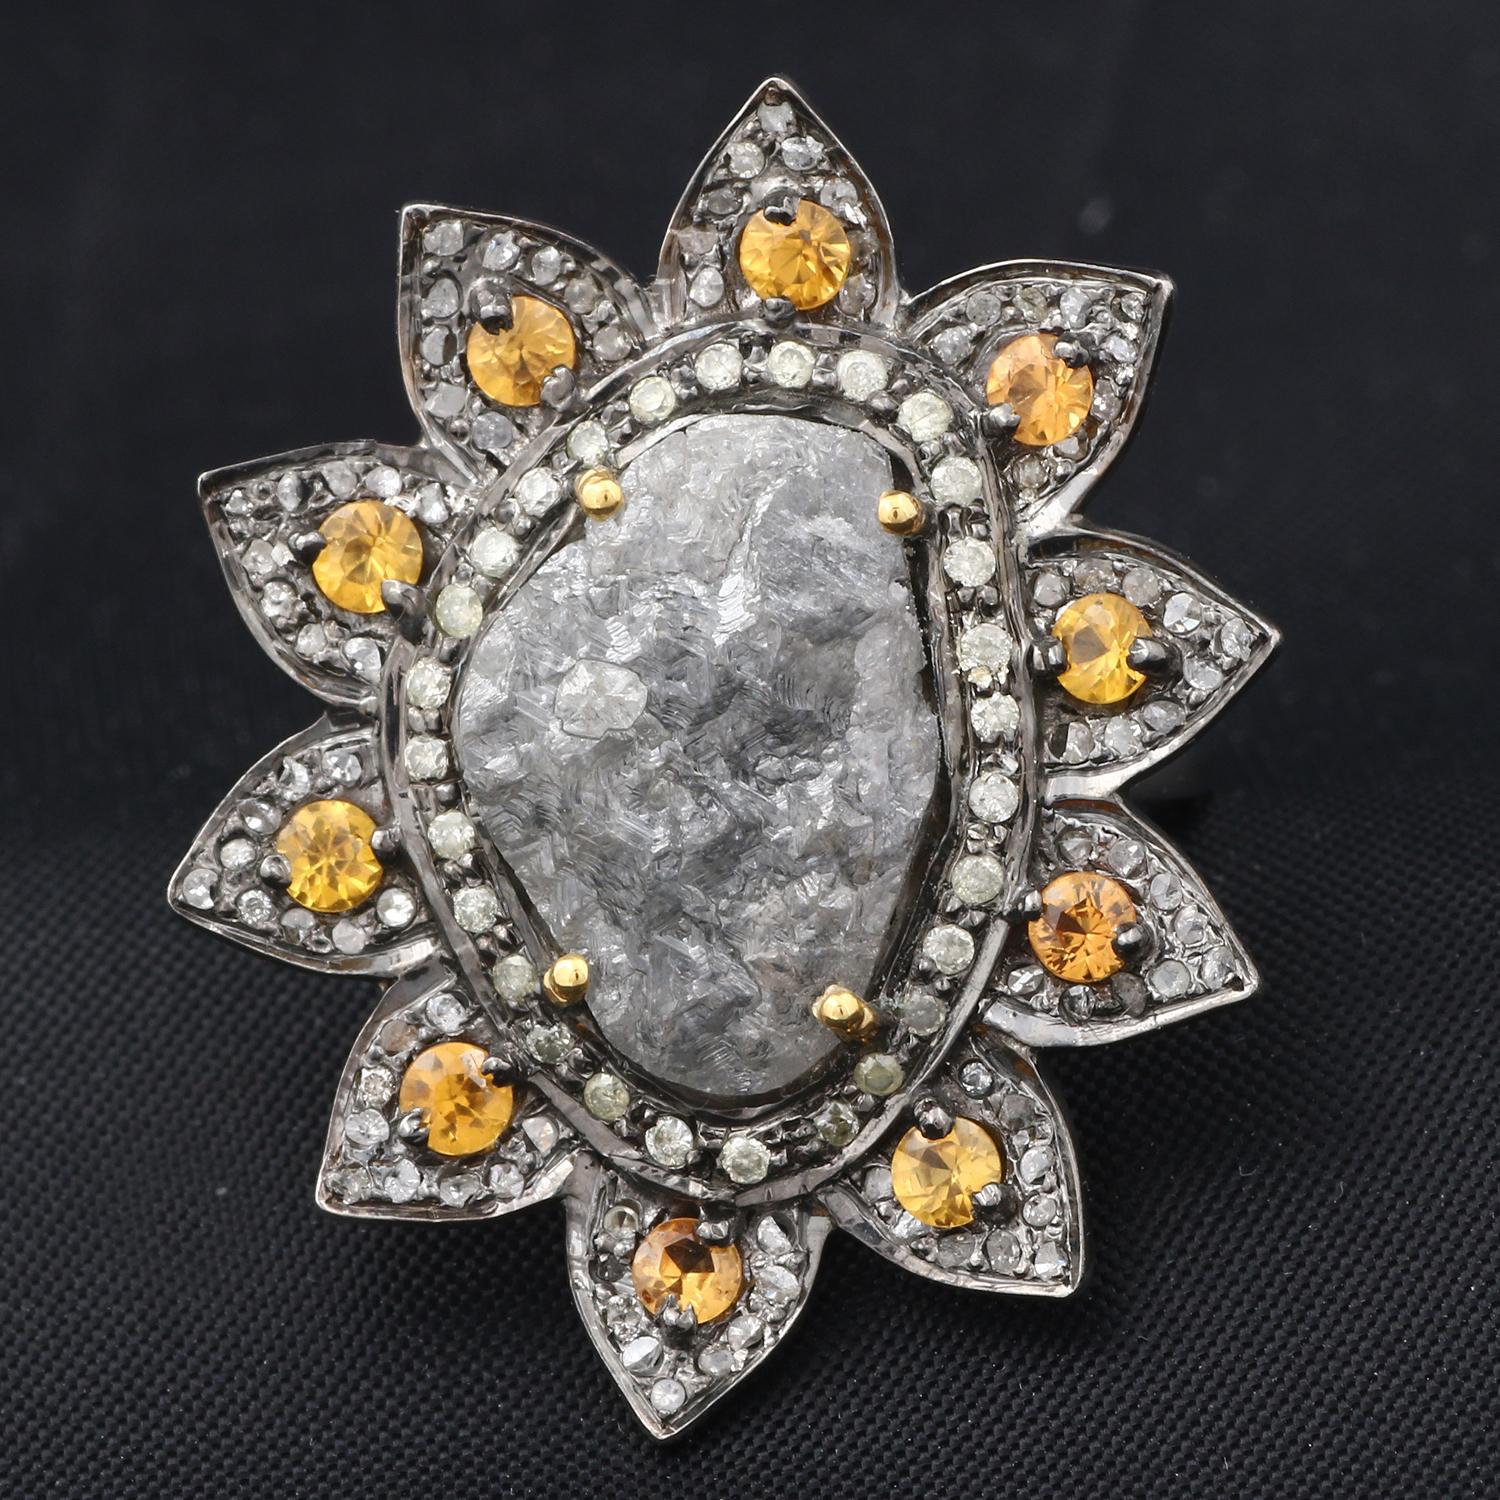 Item details:-

✦ SKU:- ESRG00131

✦ Material :- Silver
✦ Gemstone Specification:-
✧ Diamond
✧ Citrine

✦ Approx. Diamond Weight : 3.5
✦ Approx. Silver Weight : 5.94
✦ Approx. Gross Weight : 6.82

Ring Size (US): 7

You will Get the same Product as